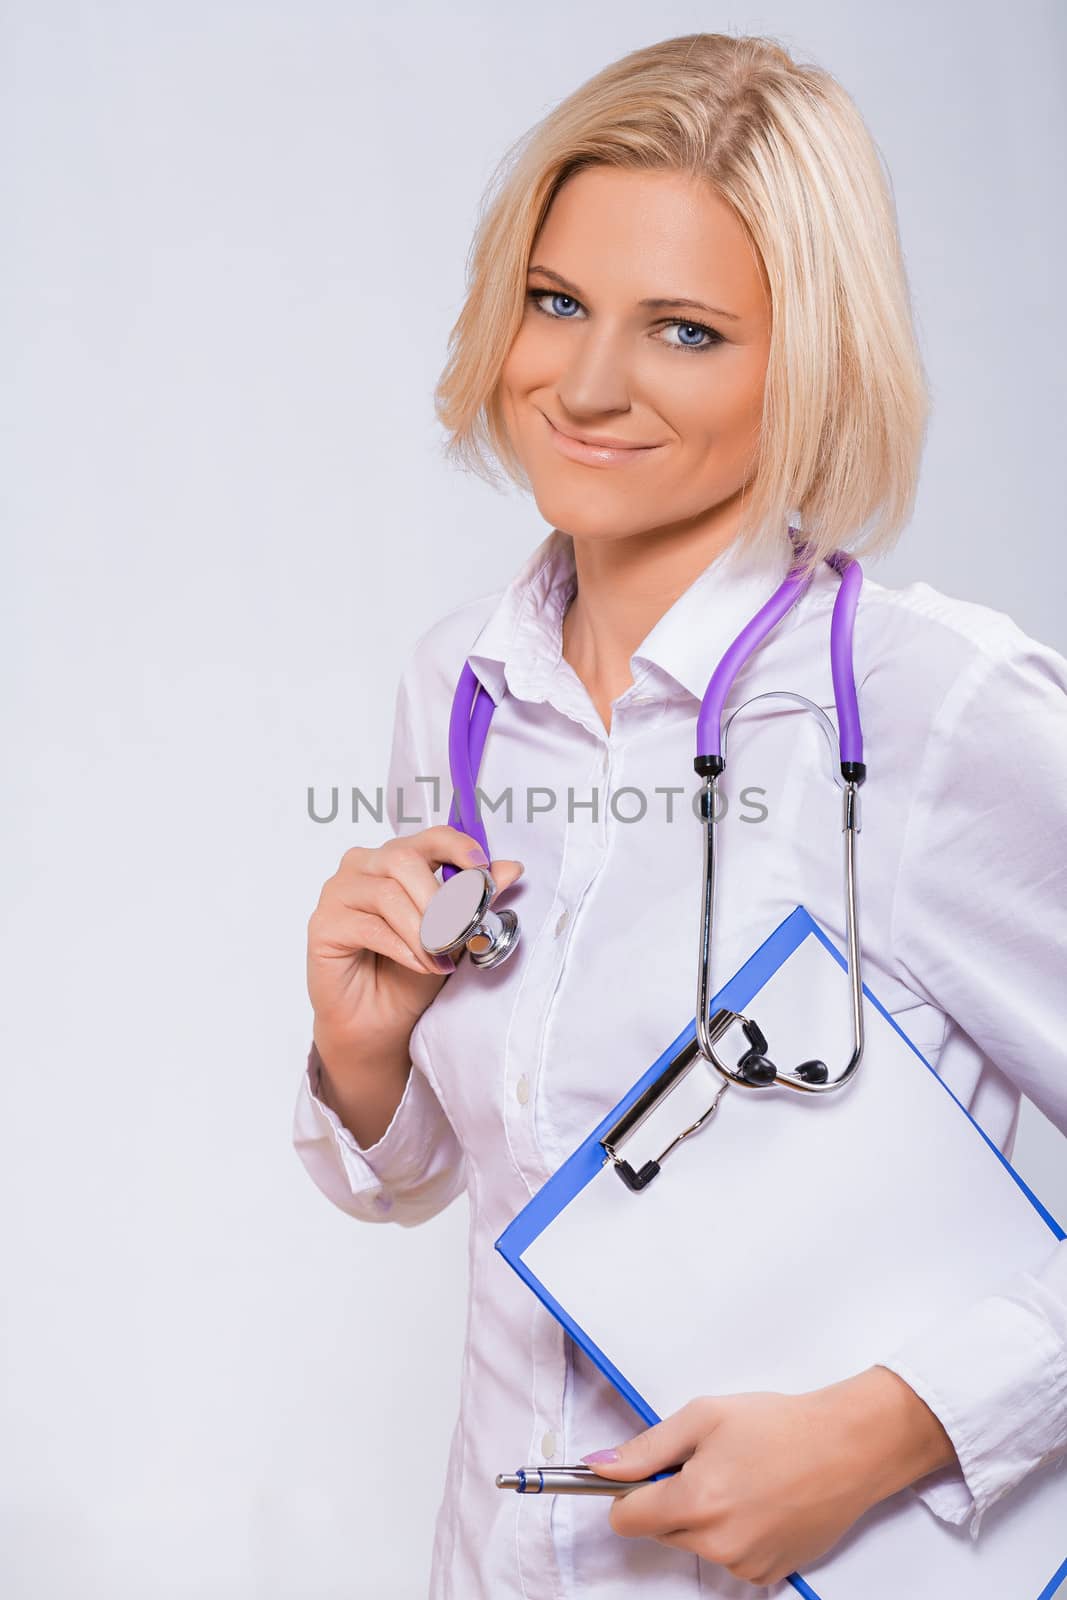 smiling medical woman doctor by mihalec